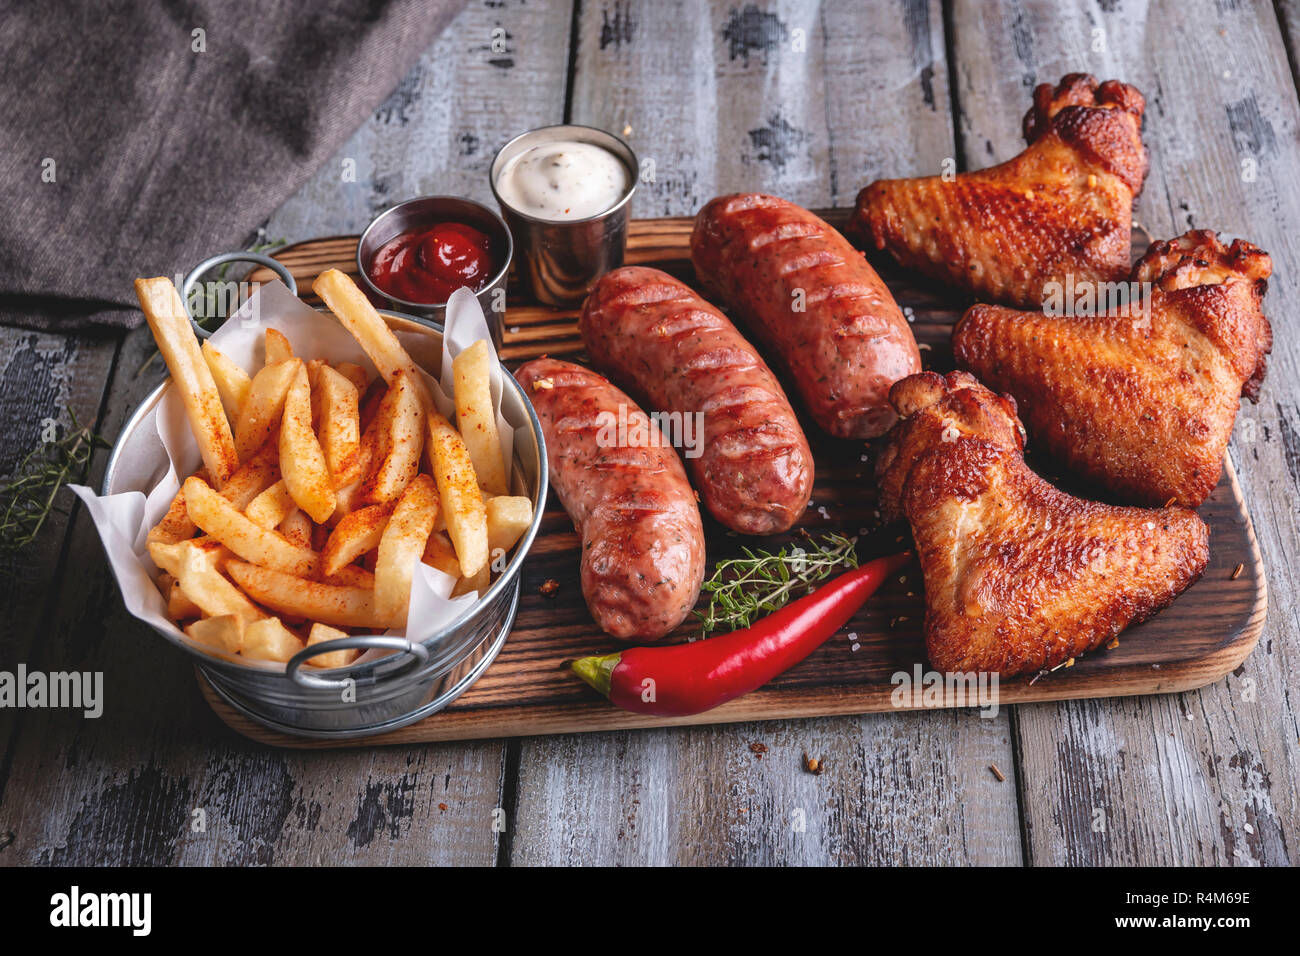 Grilled chicken wings,sausages, french fries, white and red sauce on a wooden surface Stock Photo